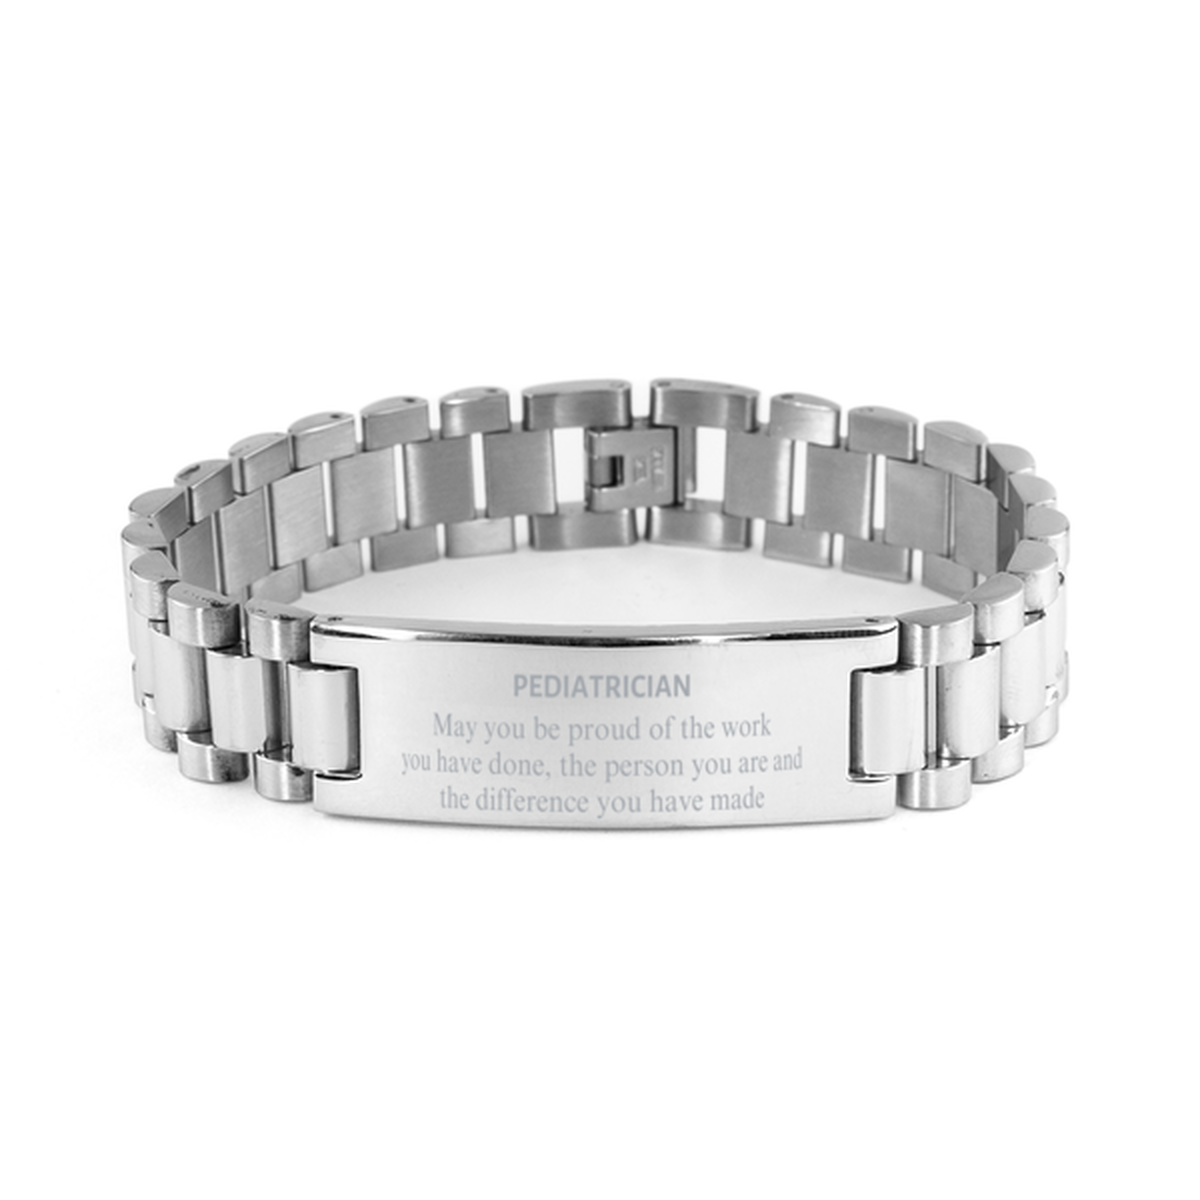 Pediatrician May you be proud of the work you have done, Retirement Pediatrician Ladder Stainless Steel Bracelet for Colleague Appreciation Gifts Amazing for Pediatrician